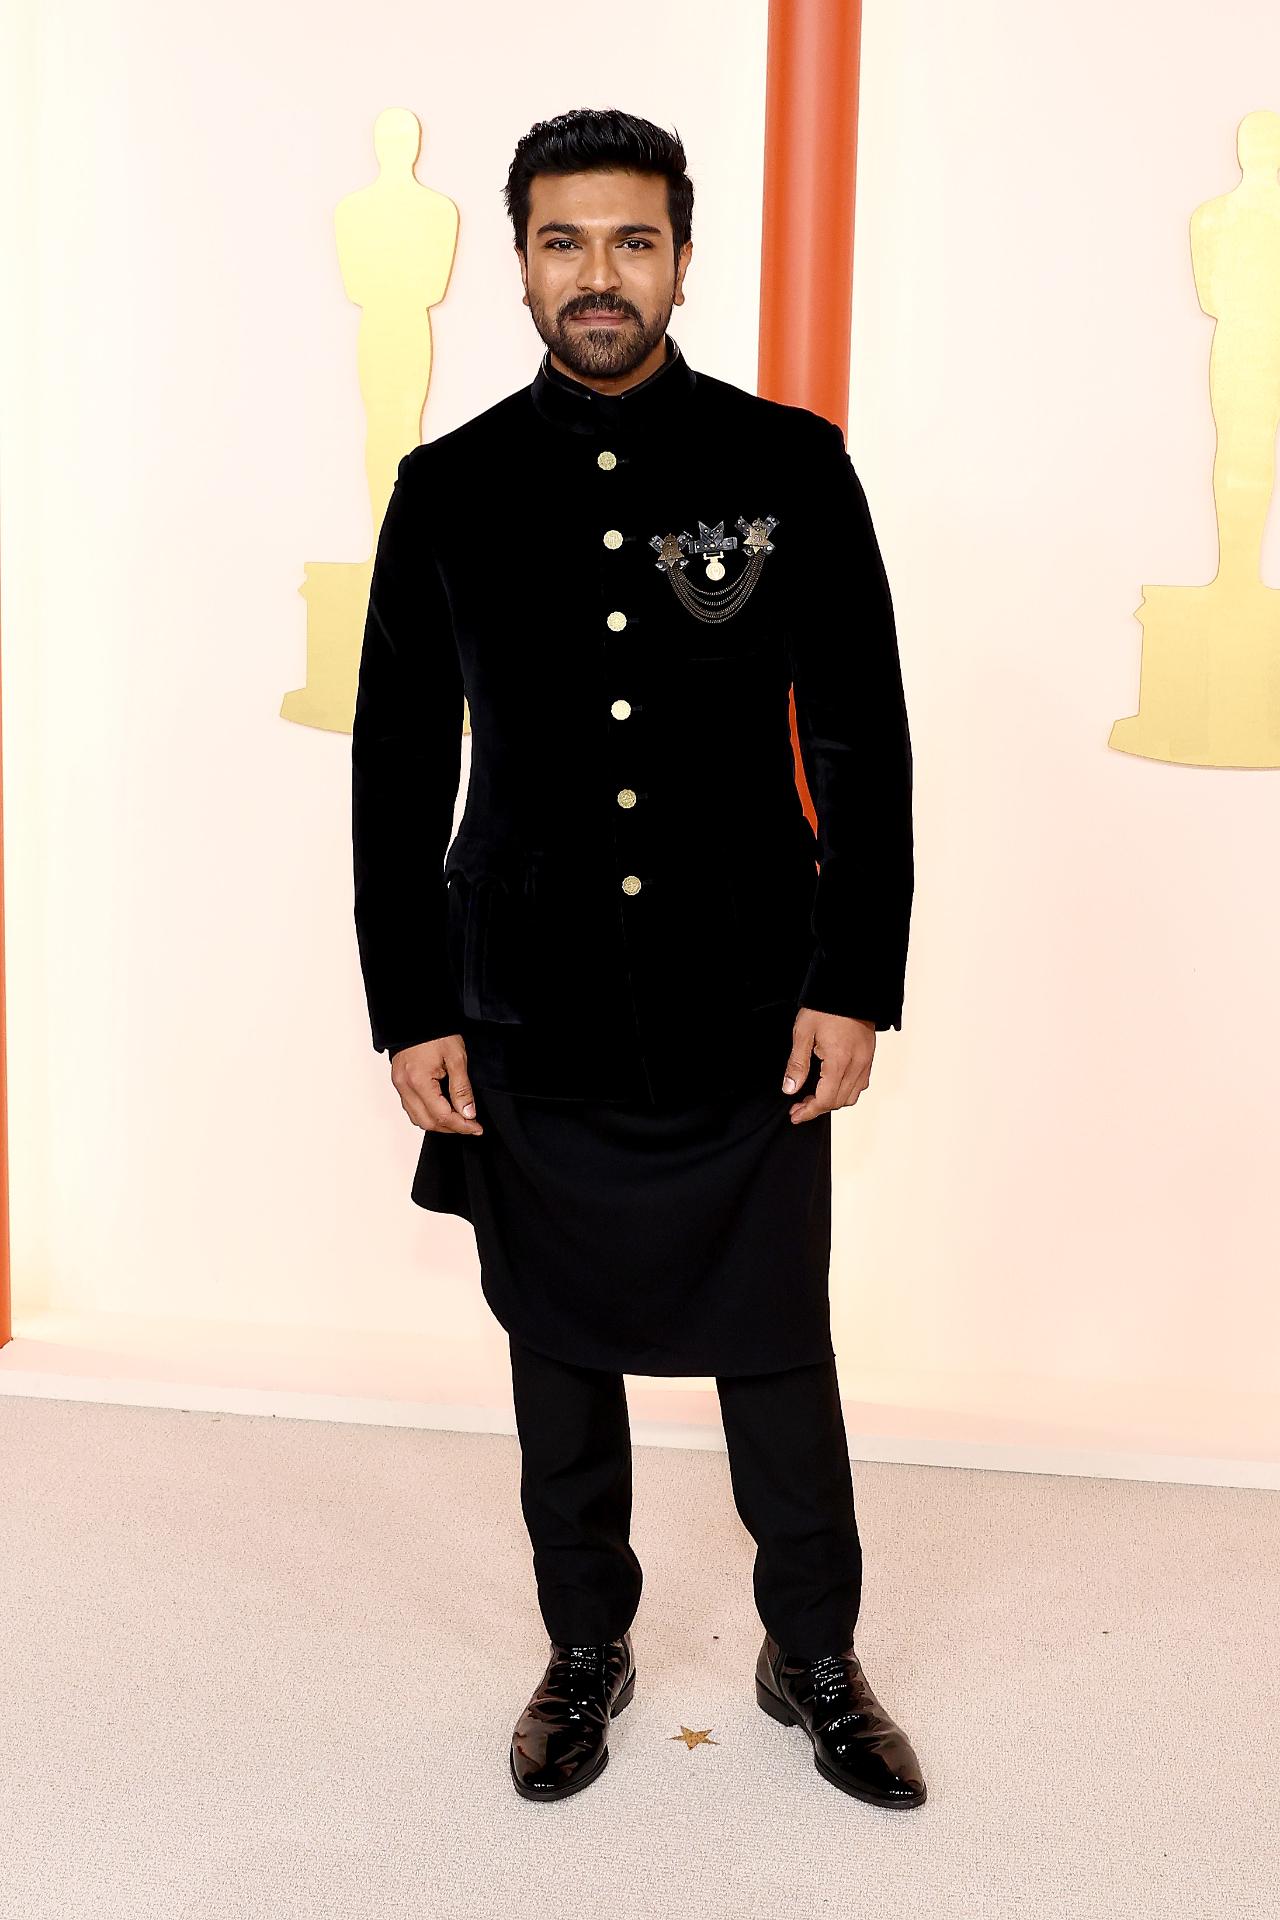 Ram Charan, representing India at the Oscars, is a matter of great pride for the entire country. The global star wore the Indian label, Shantanu & Nikhil, with immense honor. Styled by Nikita Jaisinghani, the suave Ram Charan wore a sharp bandh-gala for the awards. 